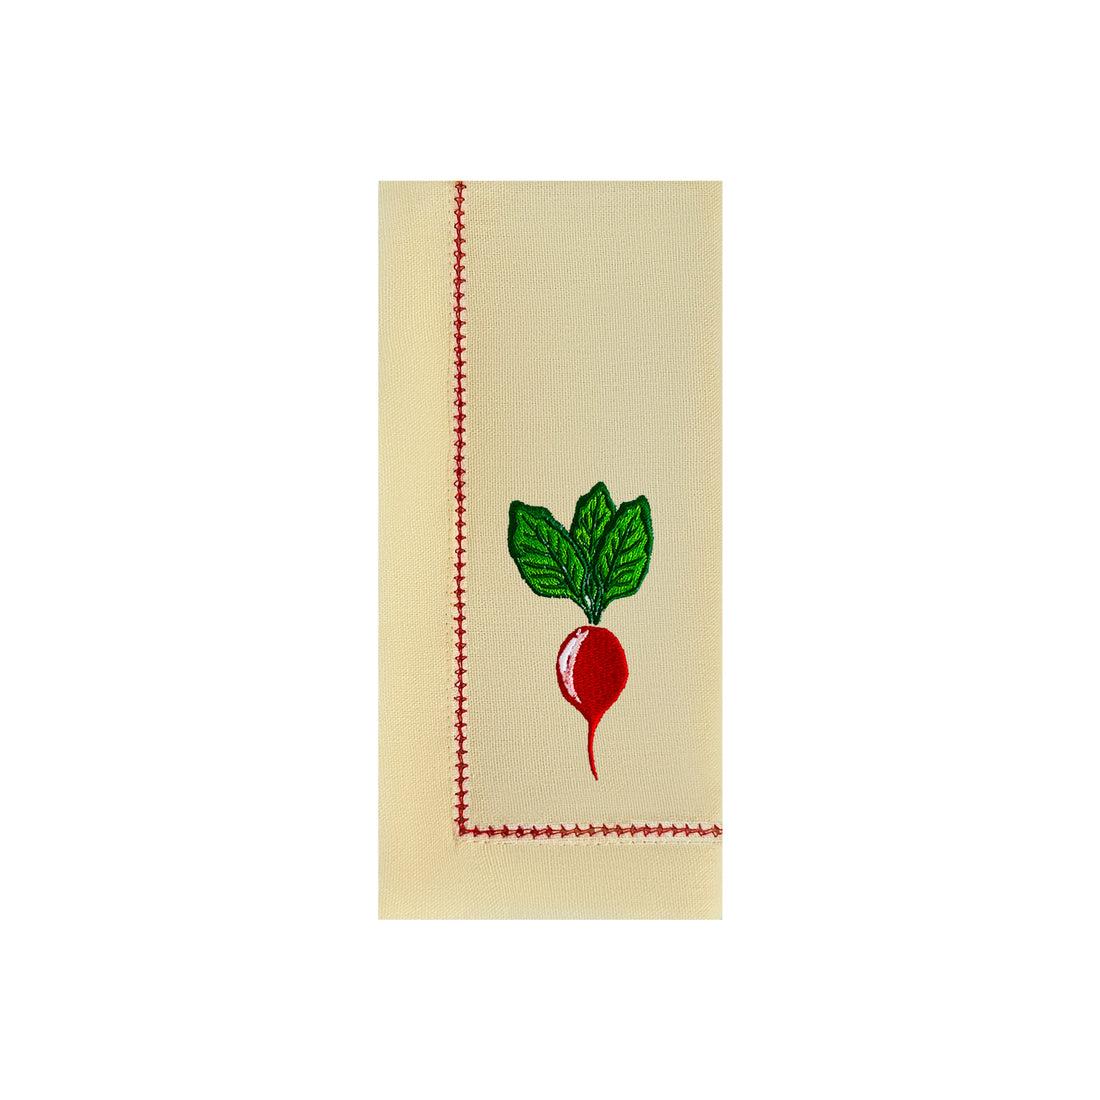 Embroidered Radish Placemats | Set of 4